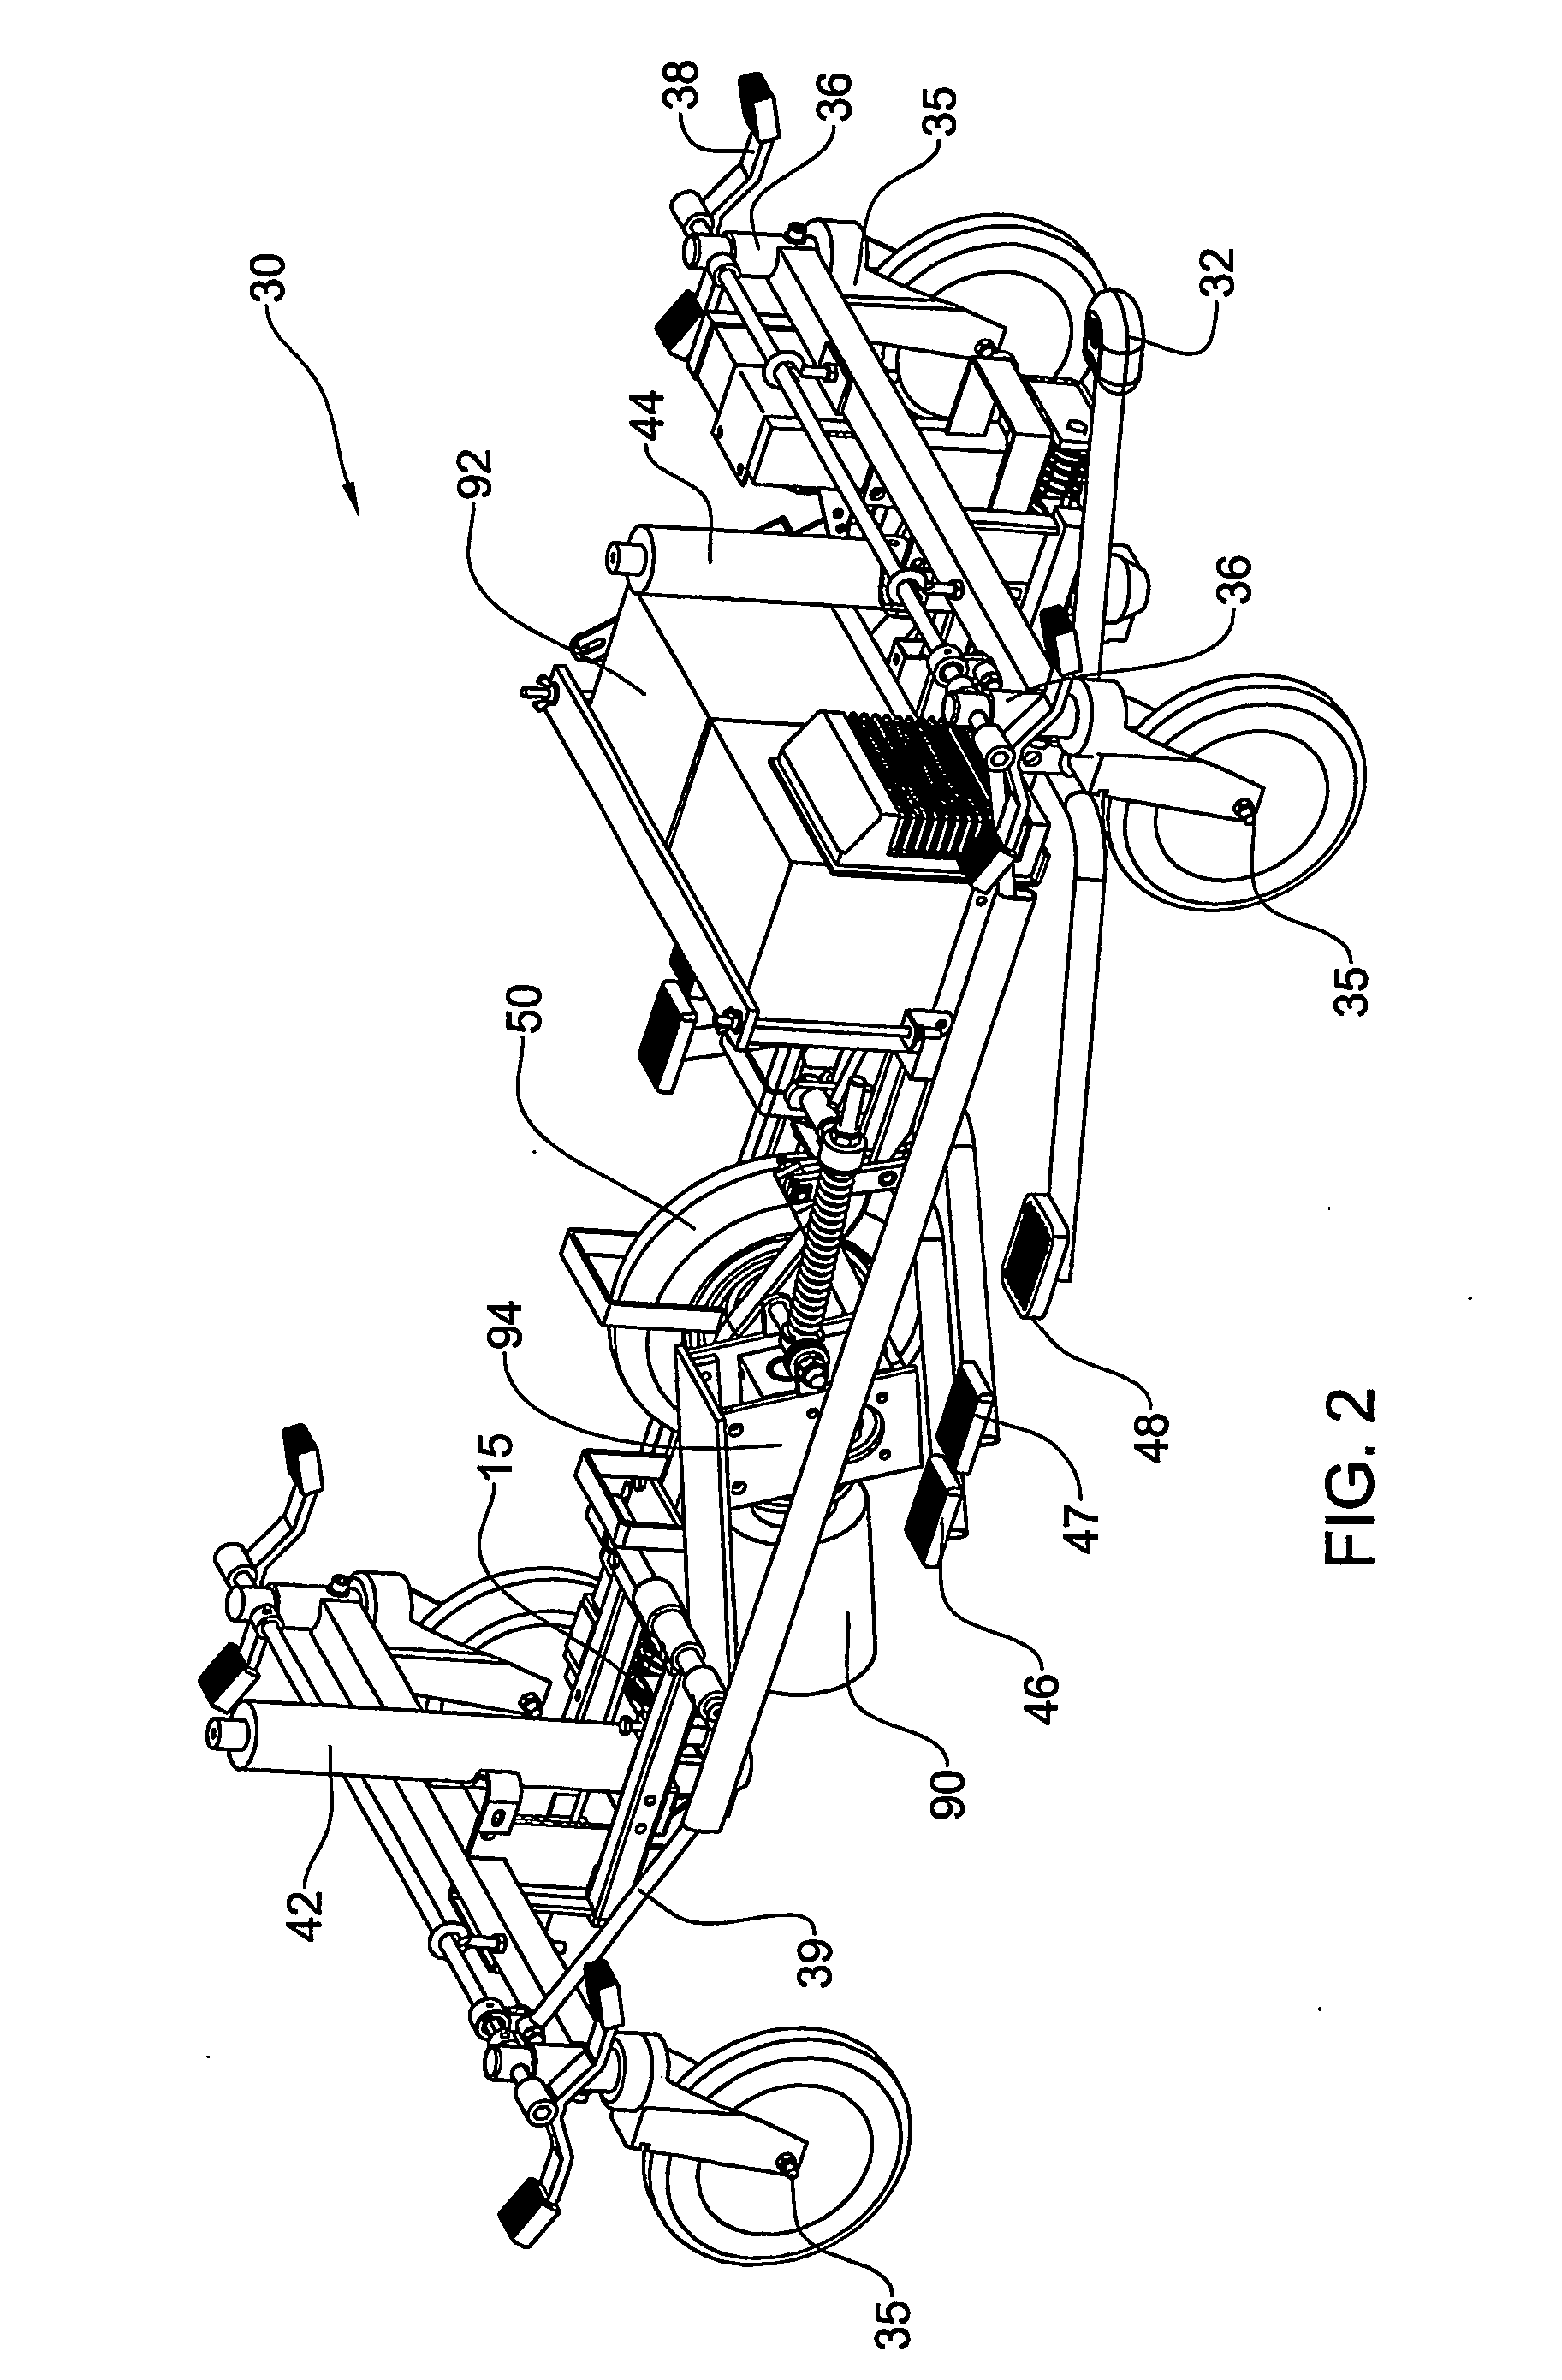 Maneuverable Device for Transporting Loads Over a Surface